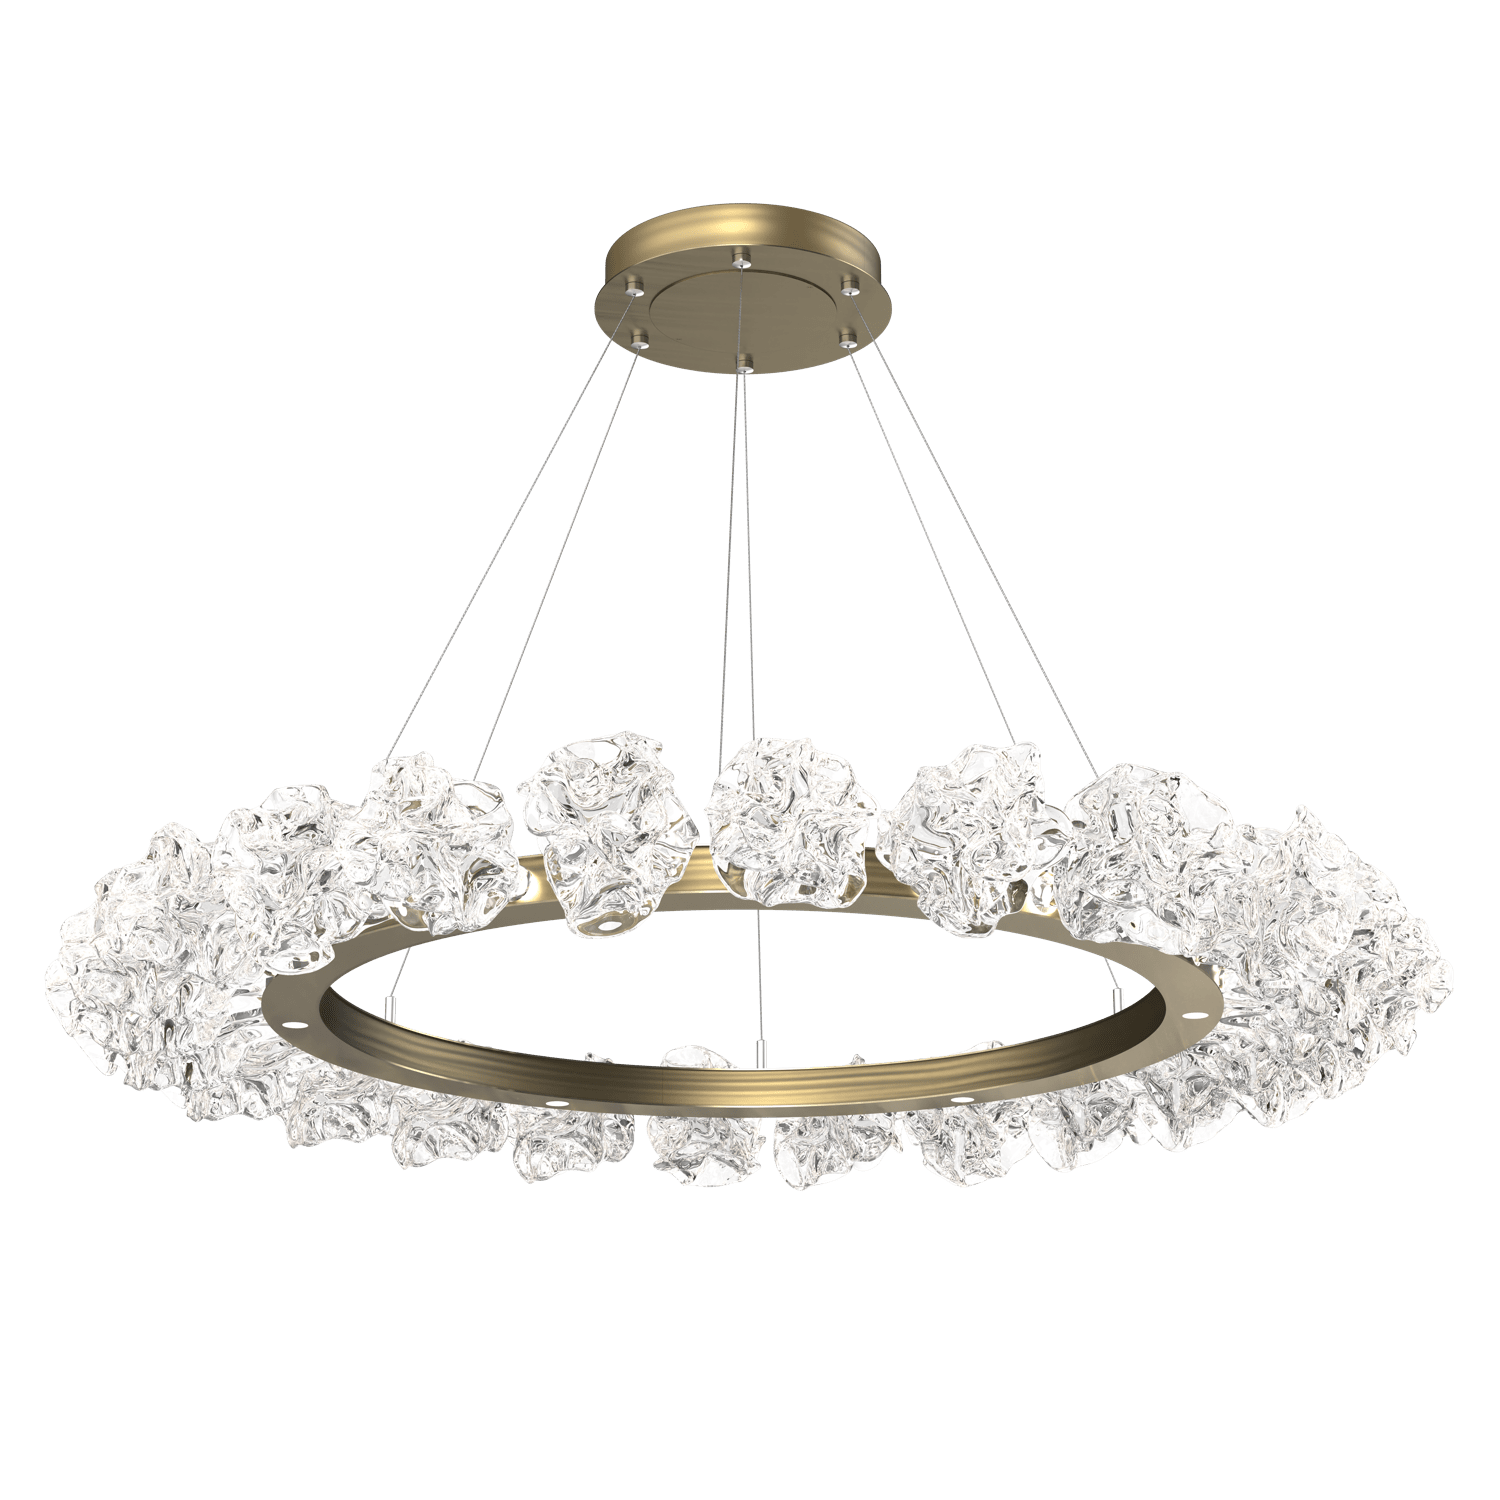 CHB0059-50-HB-Hammerton-Studio-Blossom-50-inch-radial-ring-chandelier-with-heritage-brass-finish-and-clear-handblown-crystal-glass-shades-and-LED-lamping